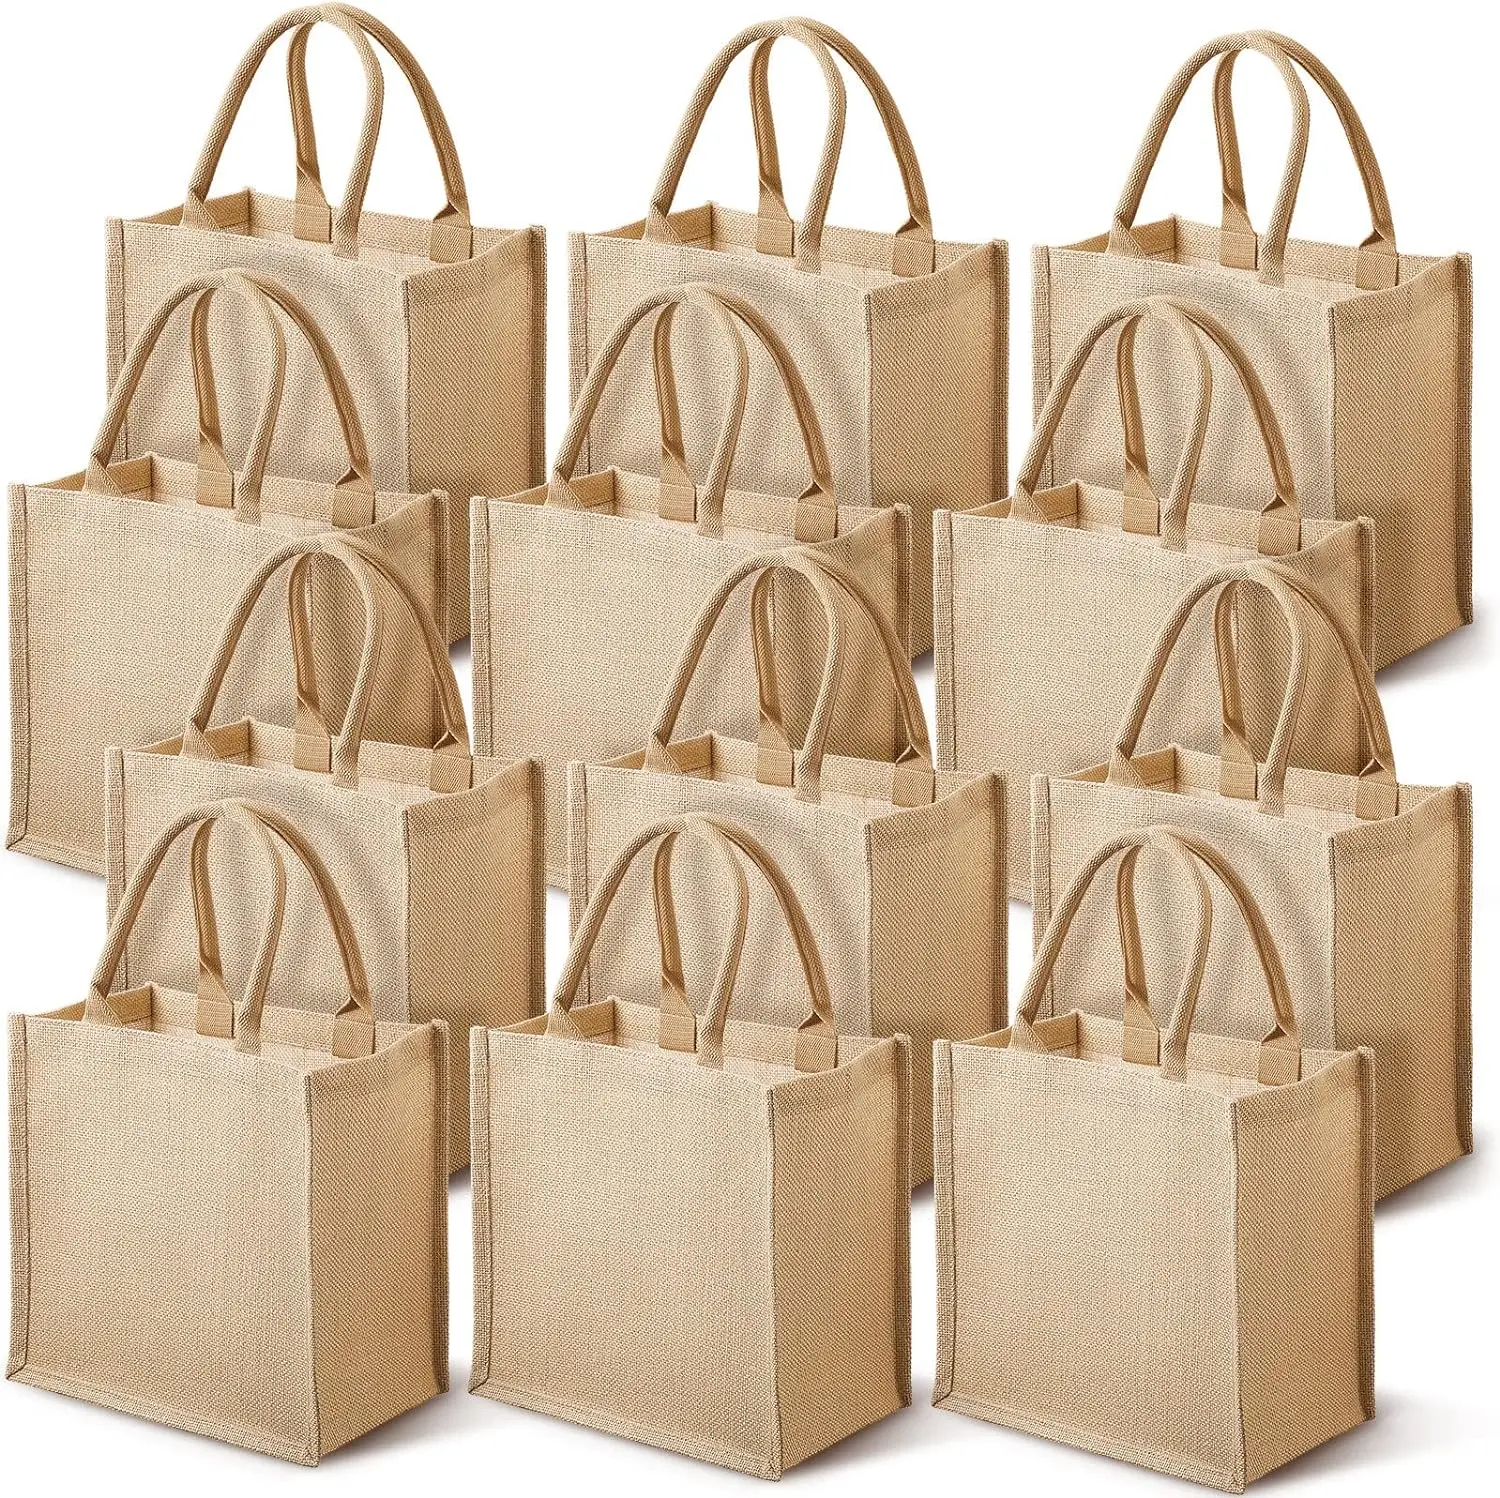 

Pcs Burlap Jute Tote Bags with Handles Laminated Interior Reusable Blank Bridesmaid Gift Bags Grocery Beach Bag for Shopping Wed